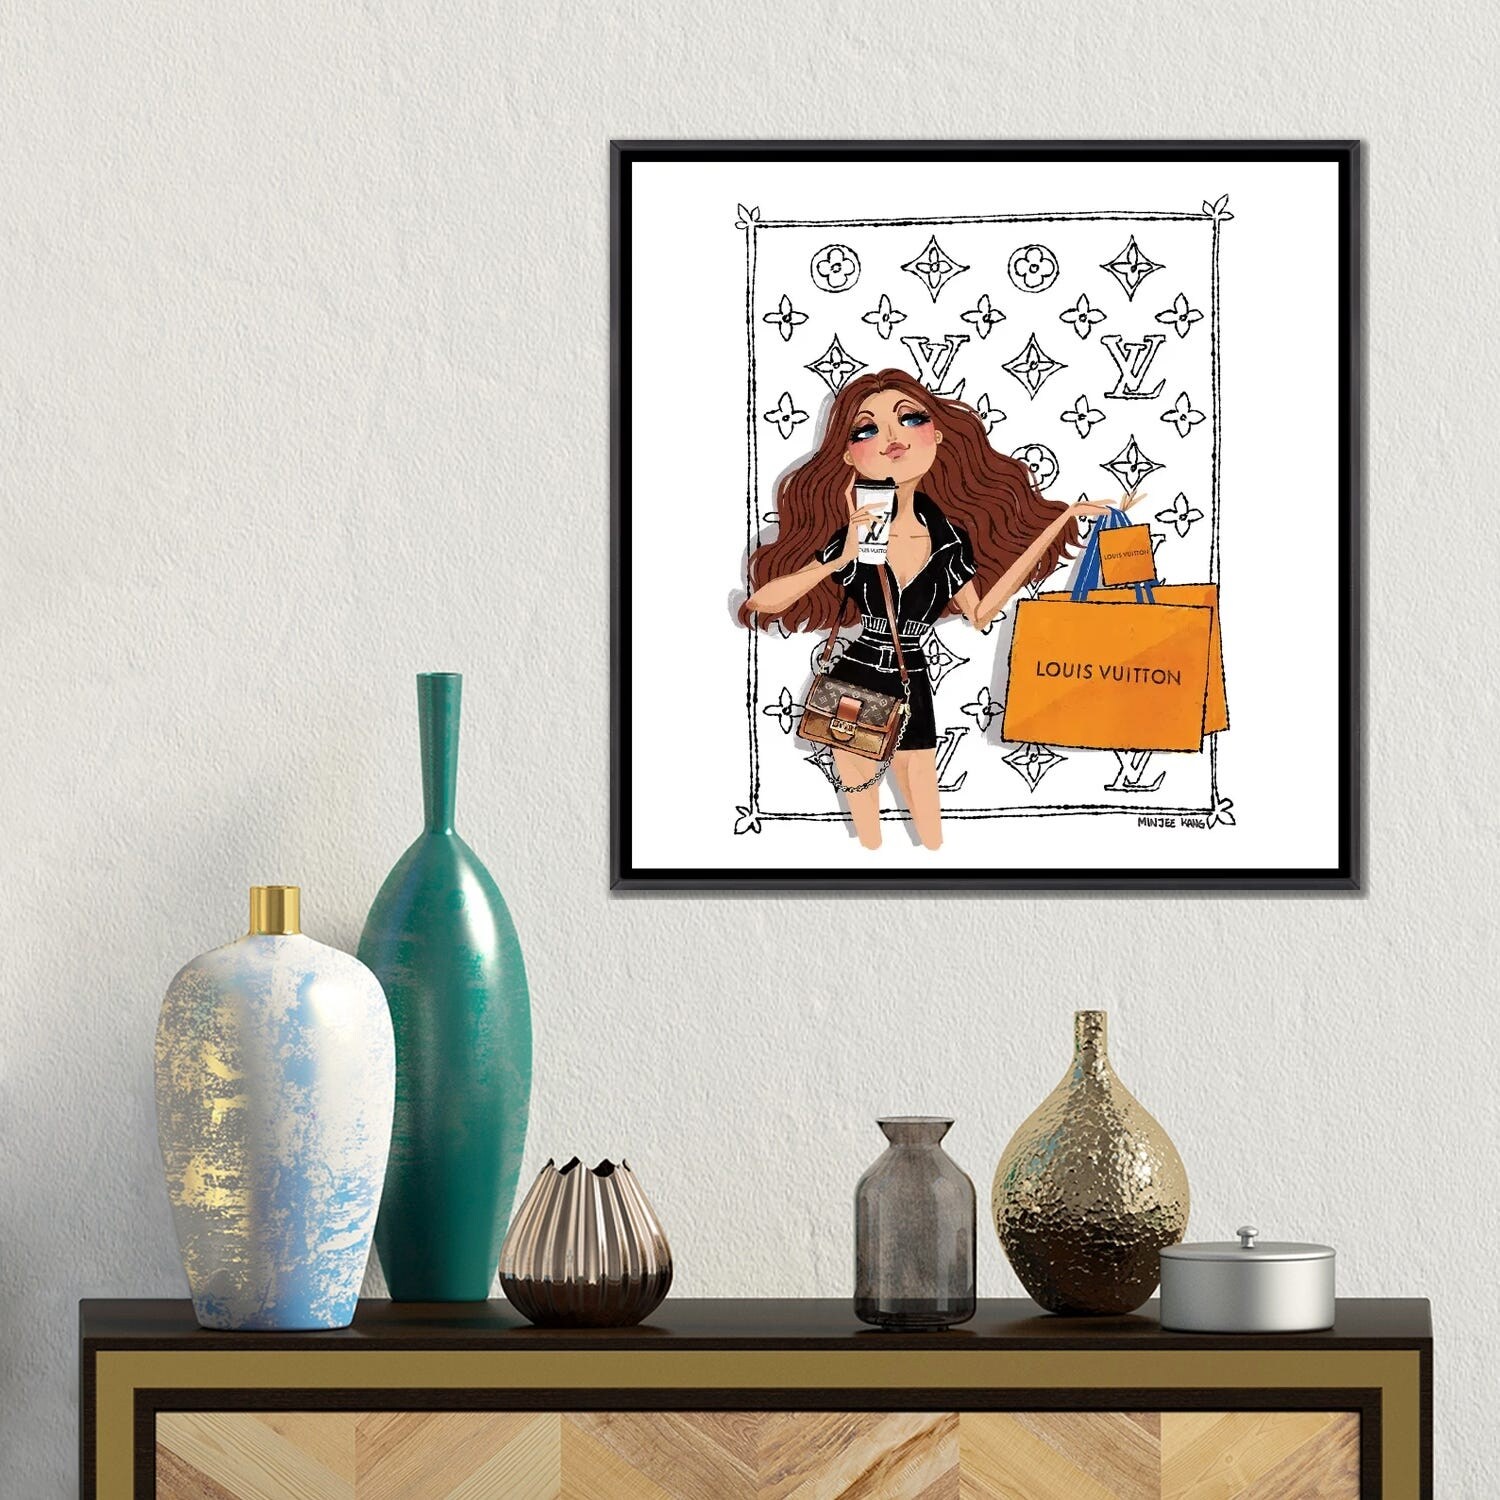 Louis Vuitton Day Canvas Artwork by Minjee Kang